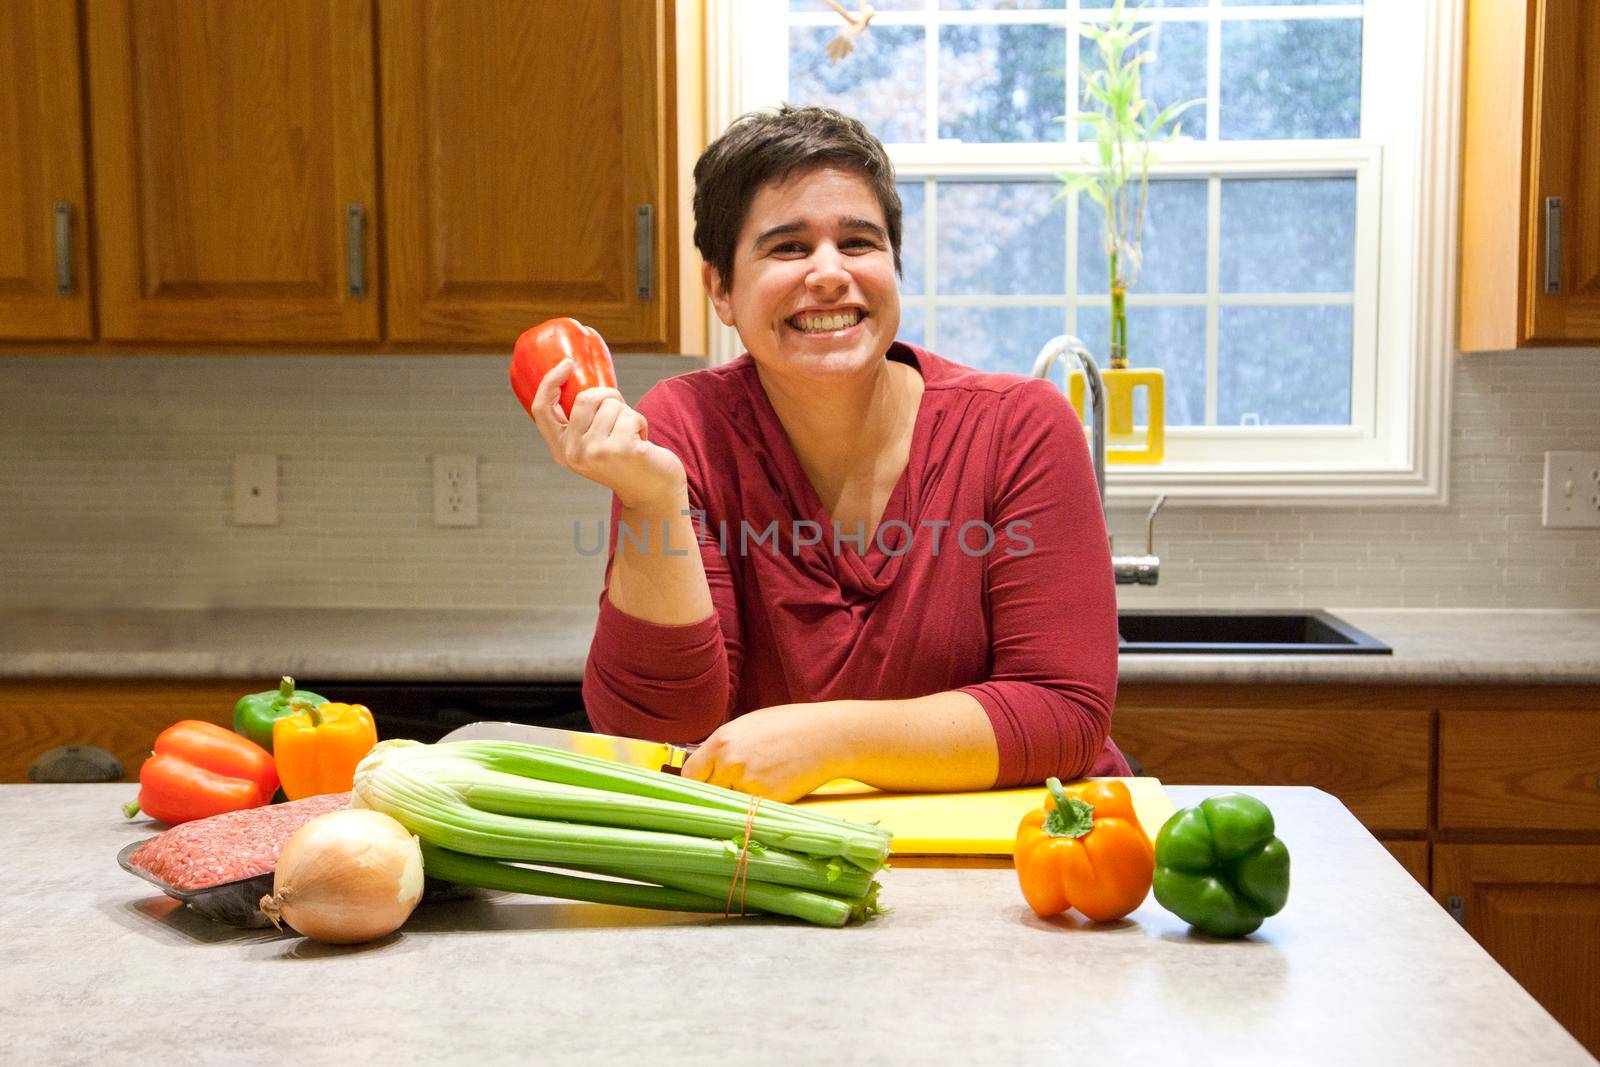 Holding a bell pepper and grinning in her beautiful kitchen, a woman prepares to cook healthy 